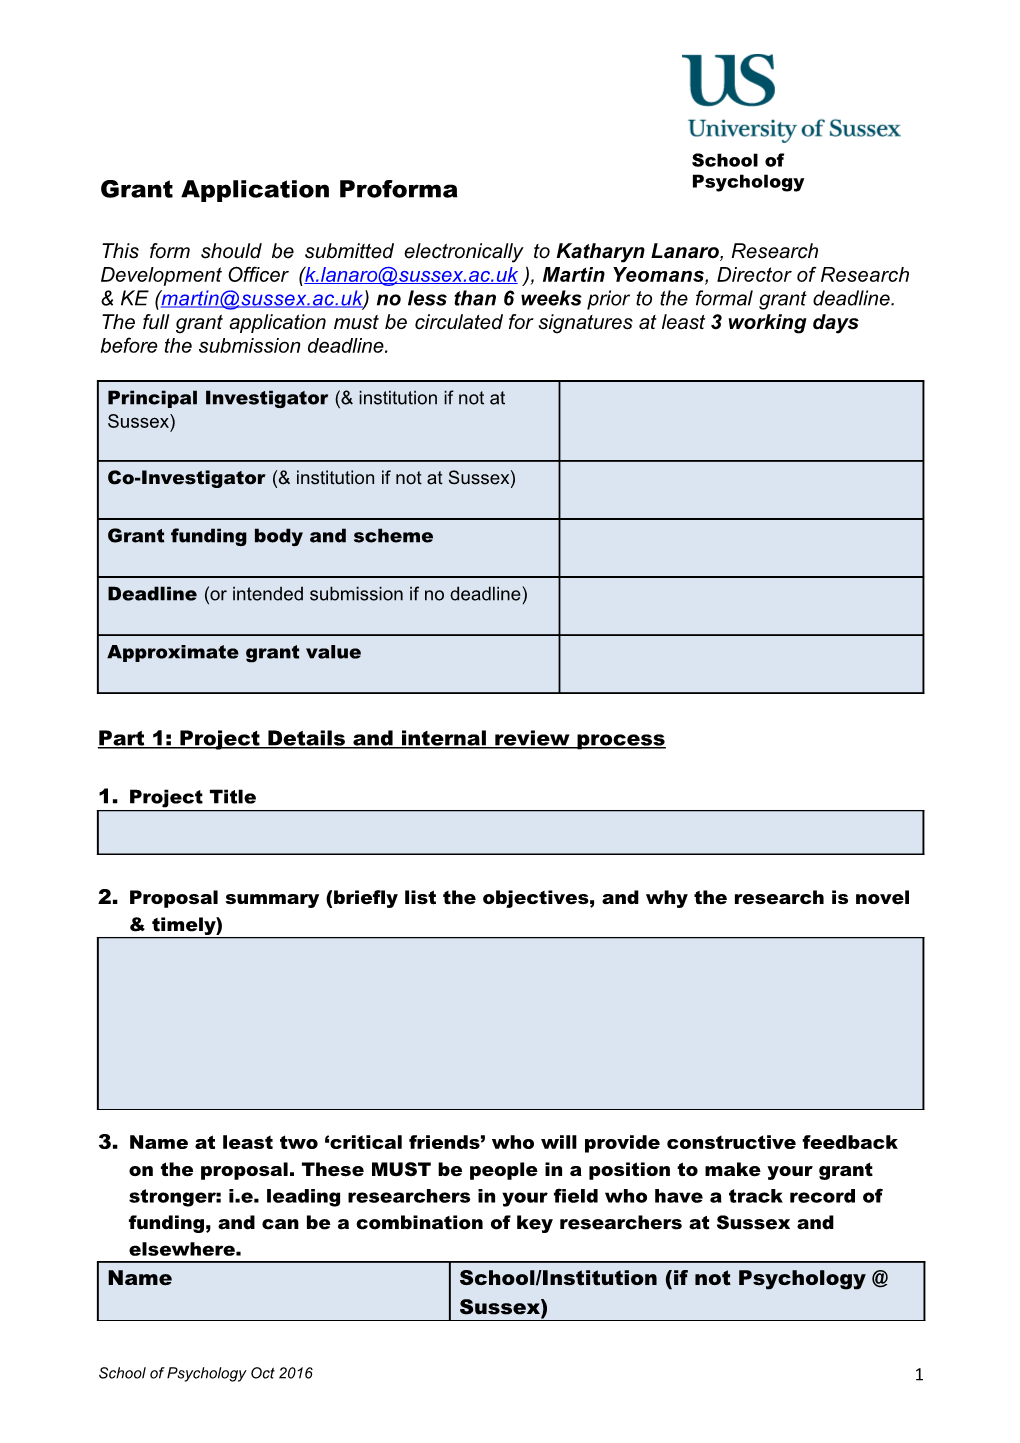 Enginf-Proforma-Grant-Application-2014-02-08